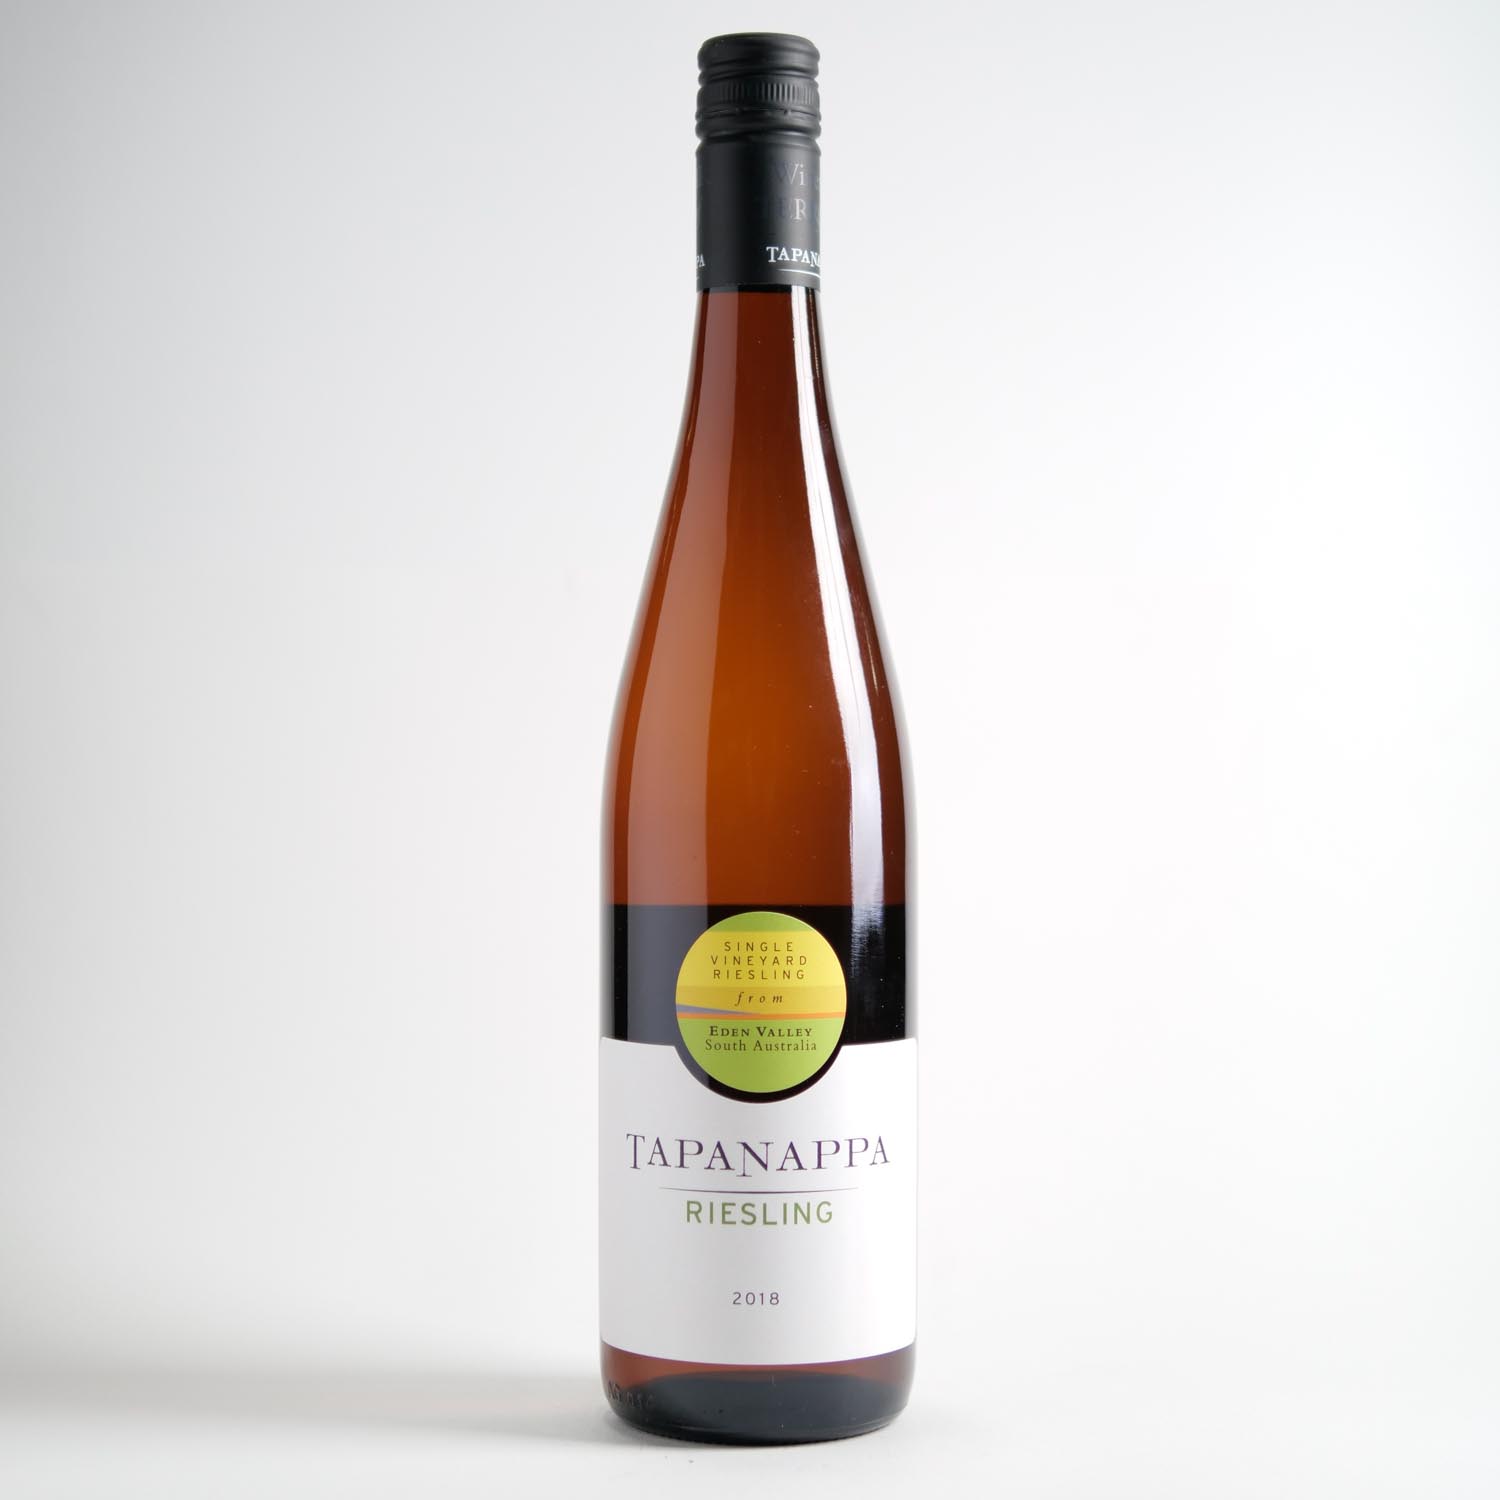 Tapanappa Eden Valley Riesling 2018